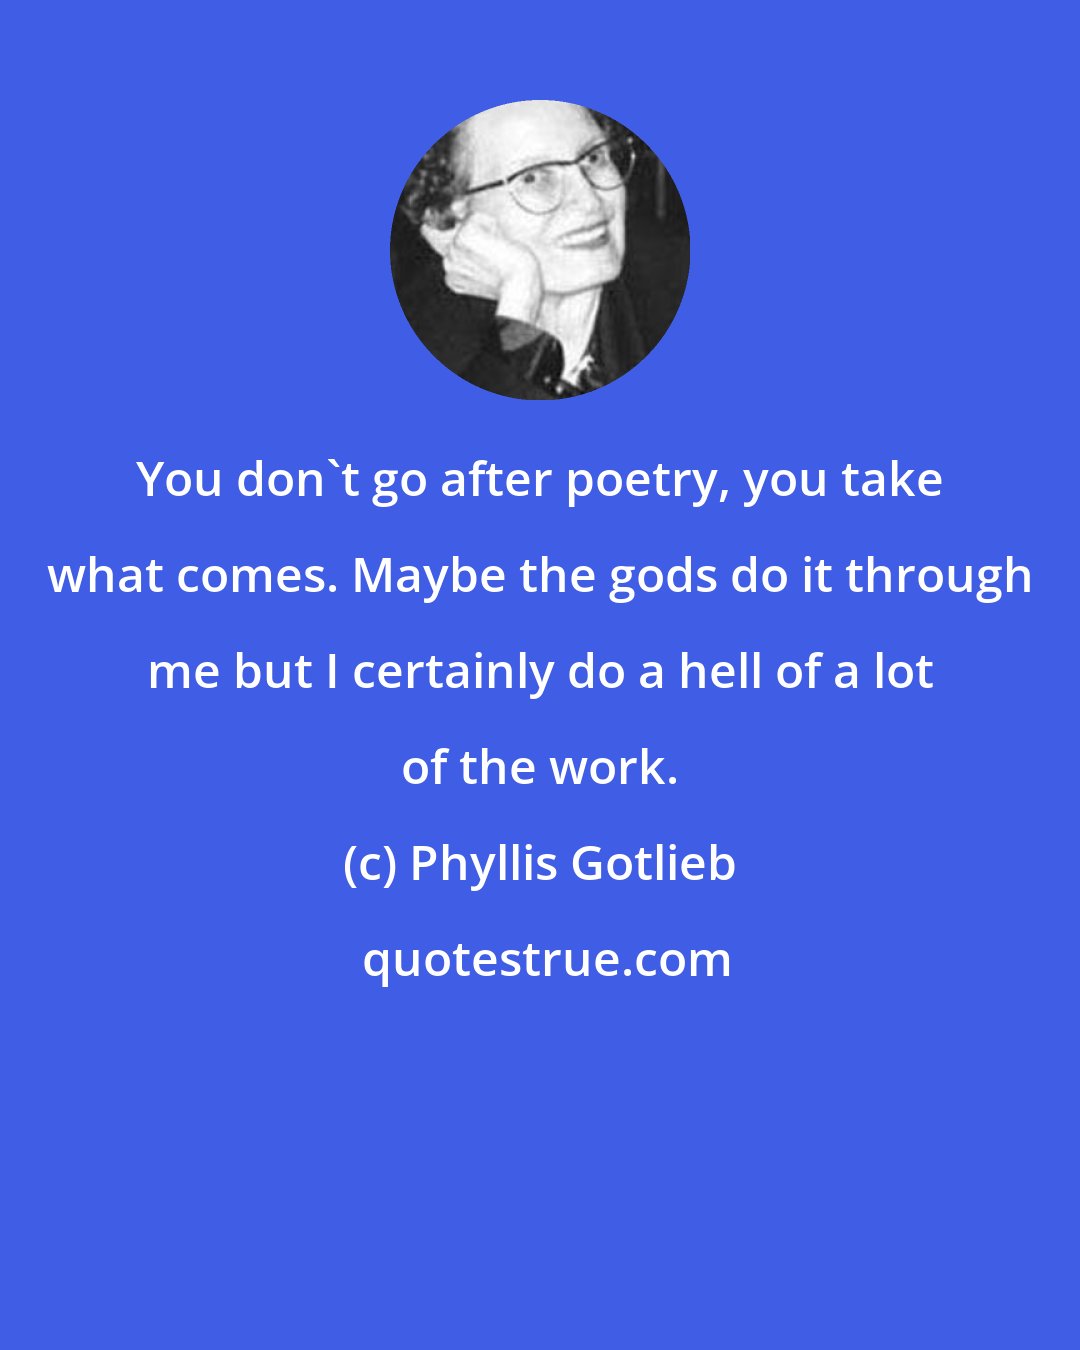 Phyllis Gotlieb: You don't go after poetry, you take what comes. Maybe the gods do it through me but I certainly do a hell of a lot of the work.